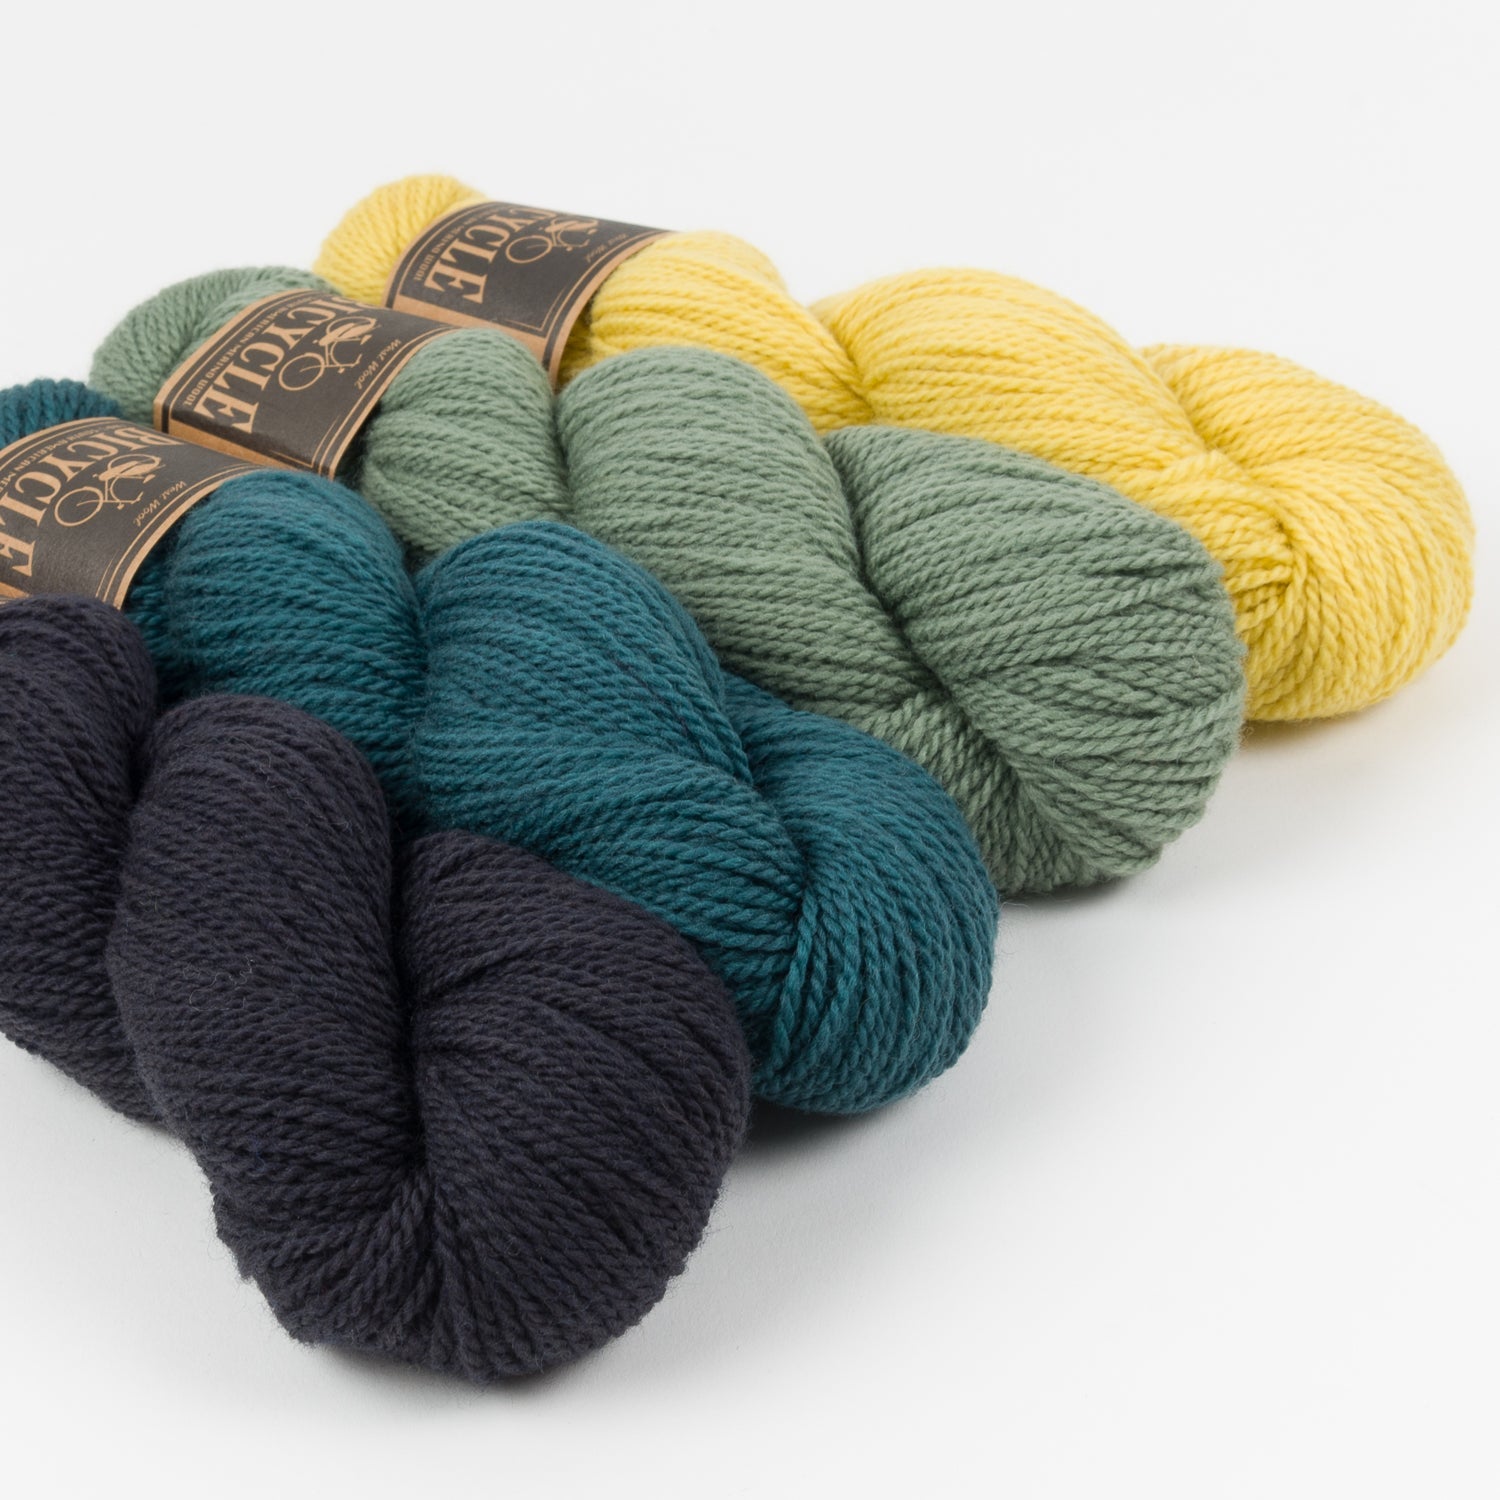 WESTKNITS KIT - MAGICAL BUTTER